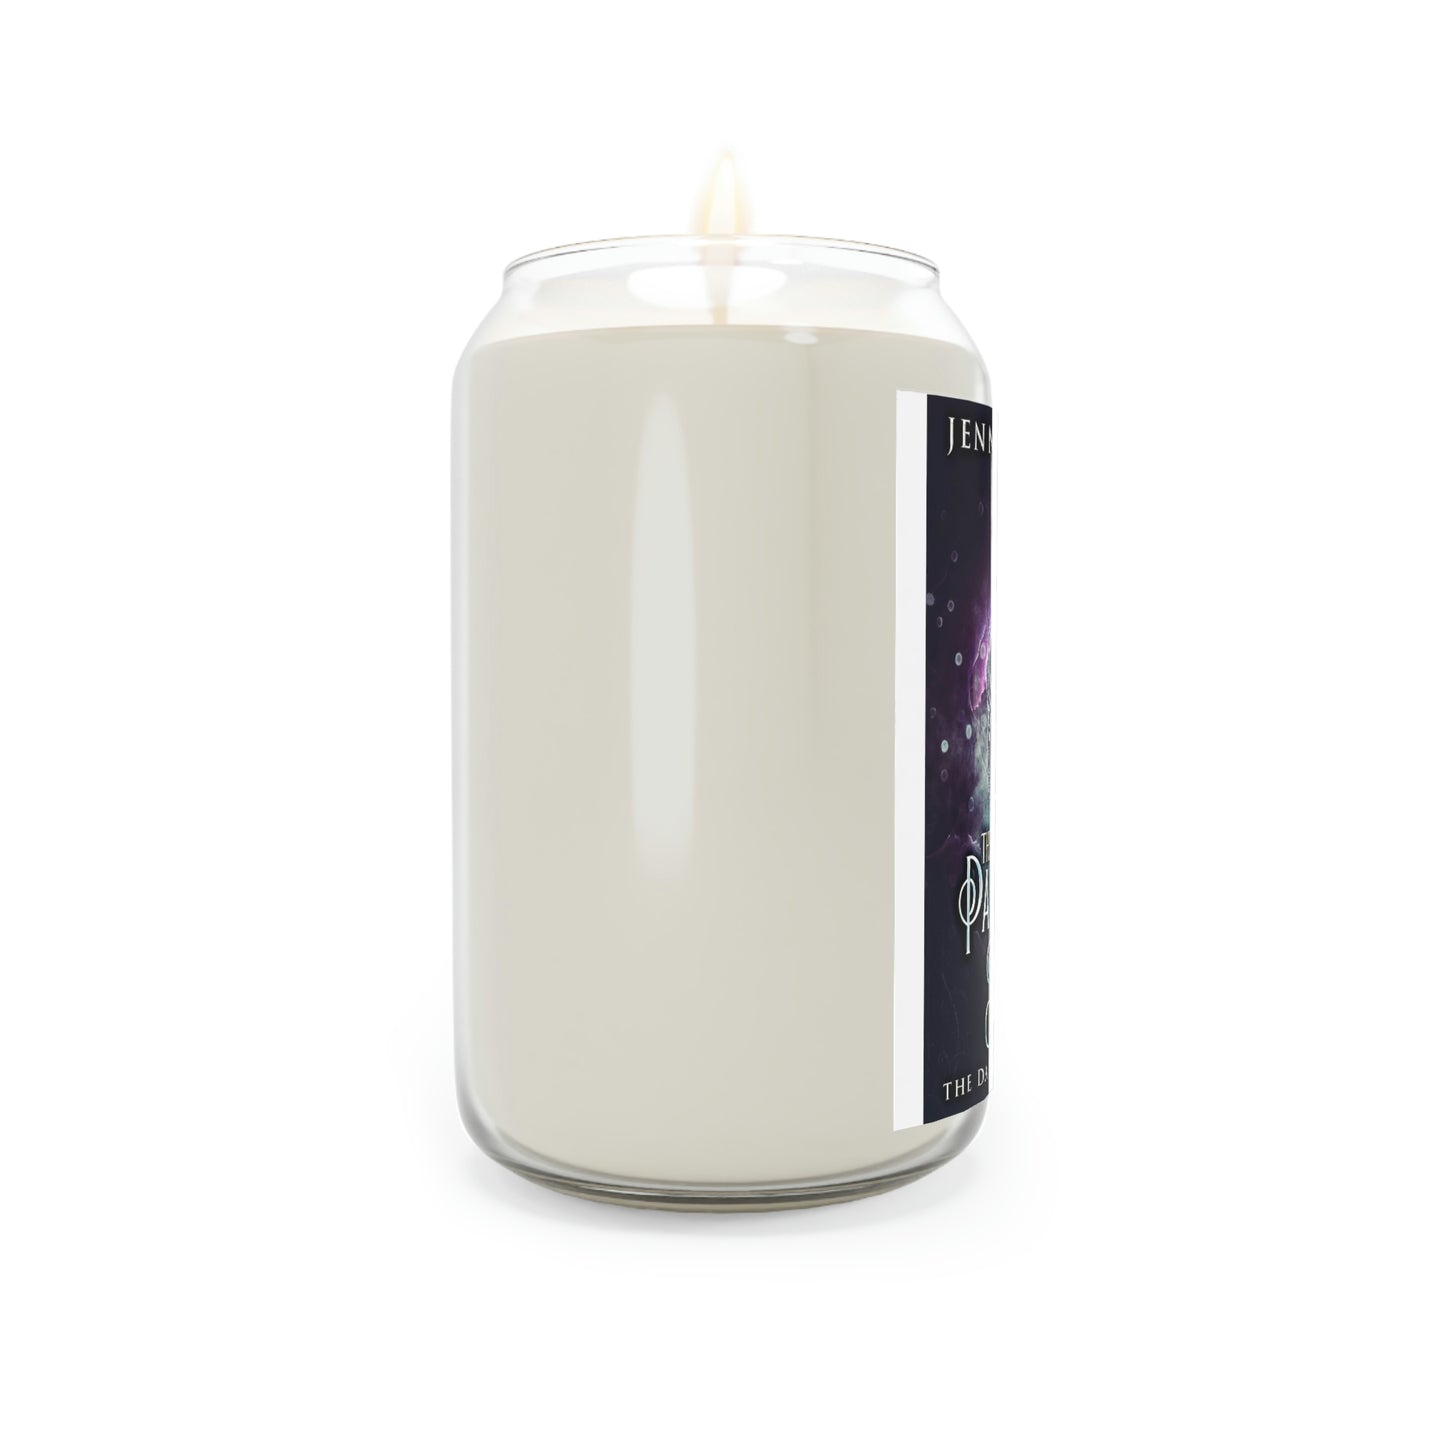 The Pale-Eyed Mage - Scented Candle